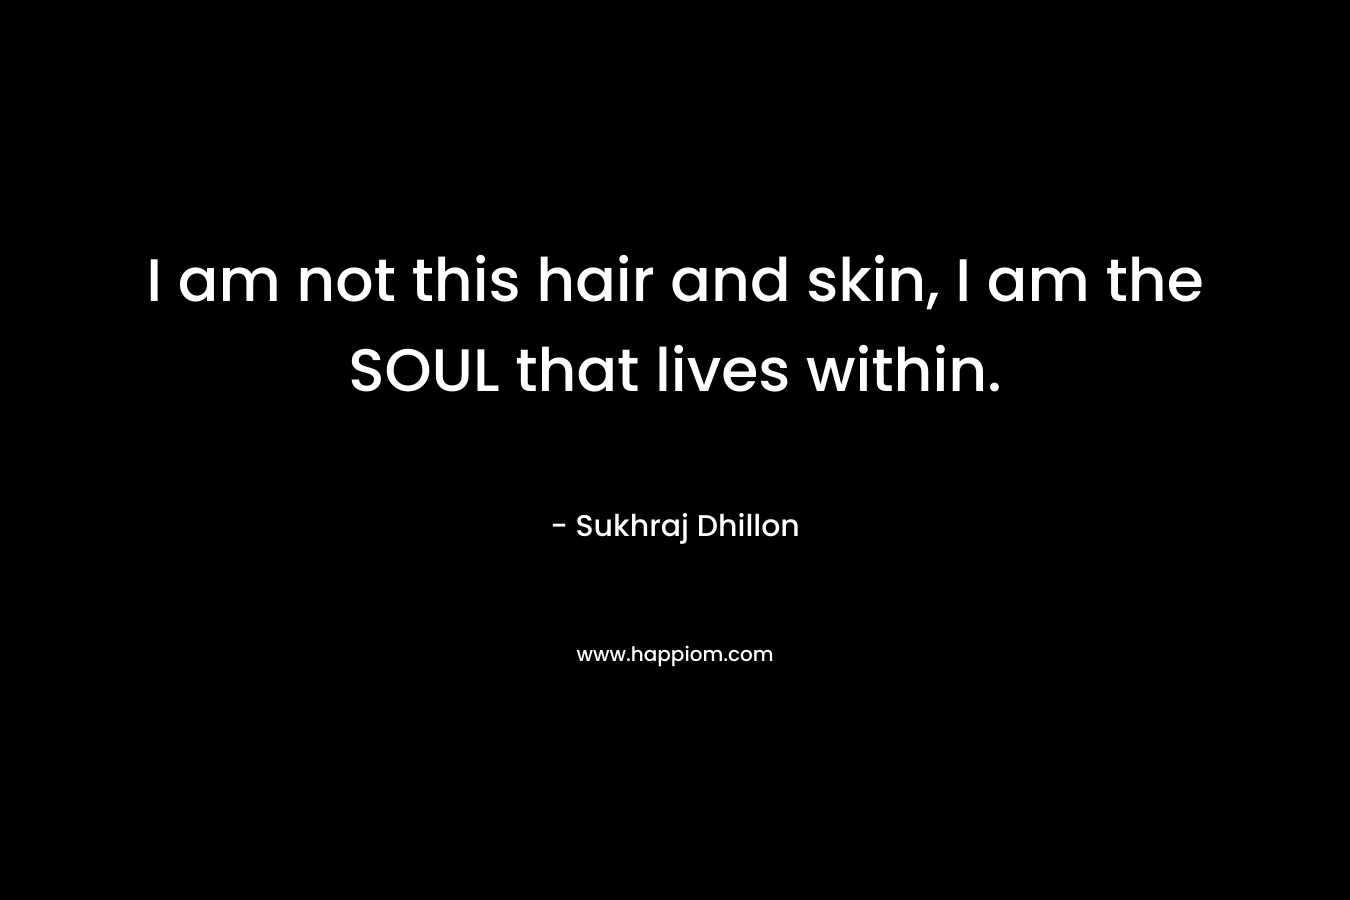 I am not this hair and skin, I am the SOUL that lives within. – Sukhraj Dhillon